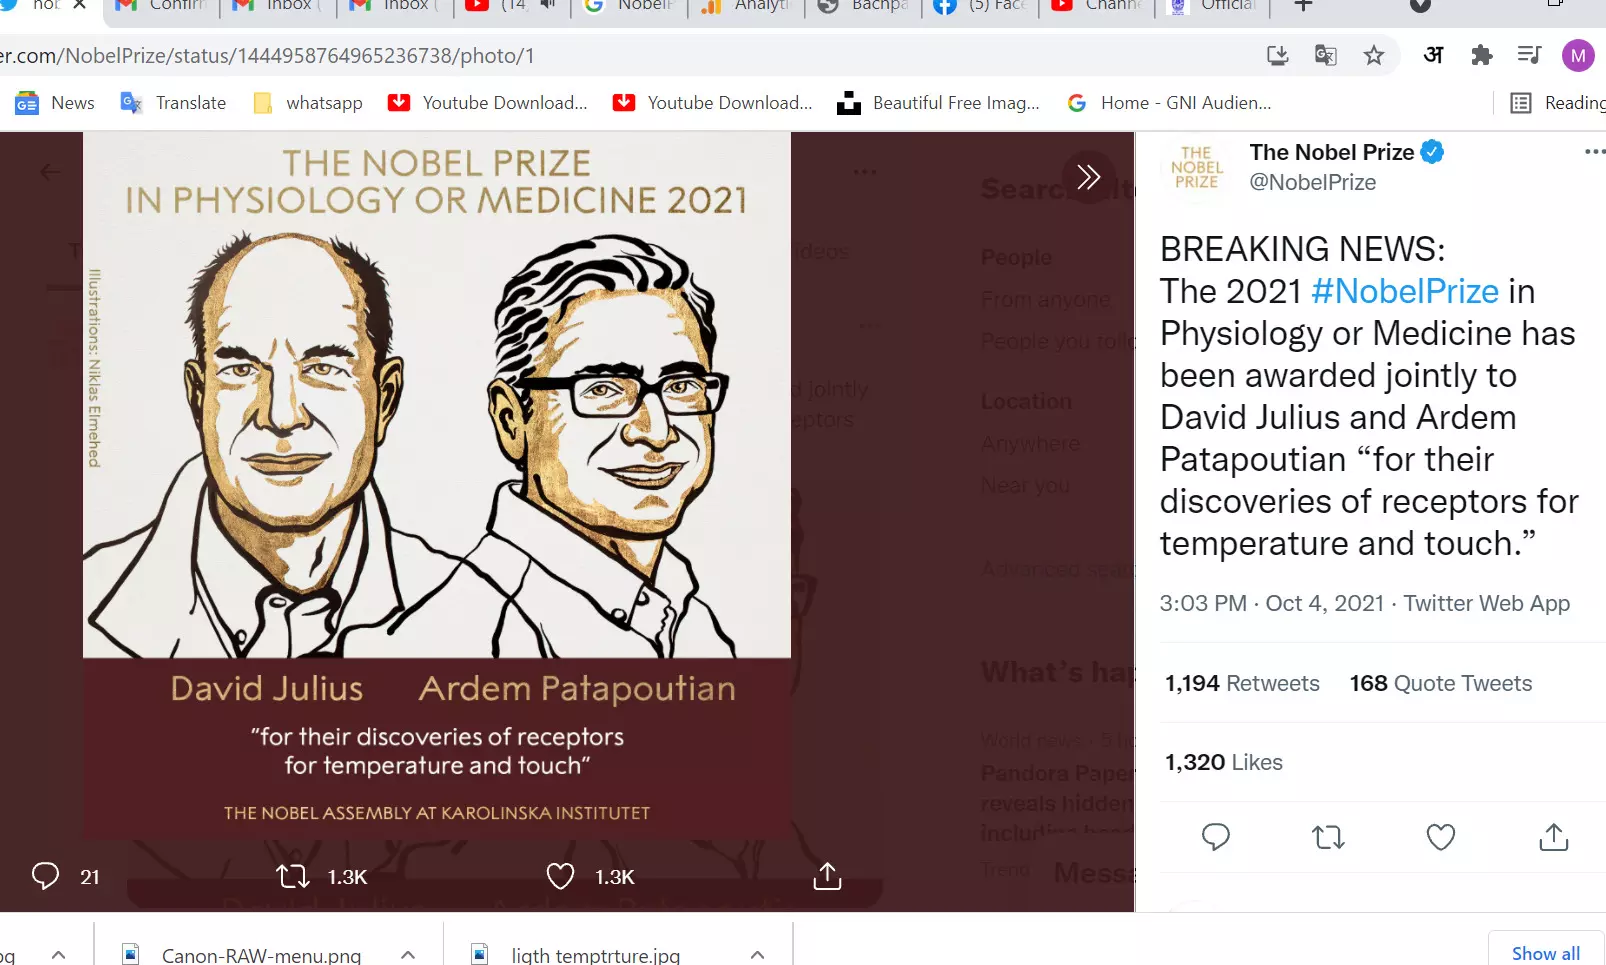 BREAKING NEWS:  The 2021 #NobelPrize in Physiology or Medicine has been awarded jointly to David Julius and Ardem Patapoutian